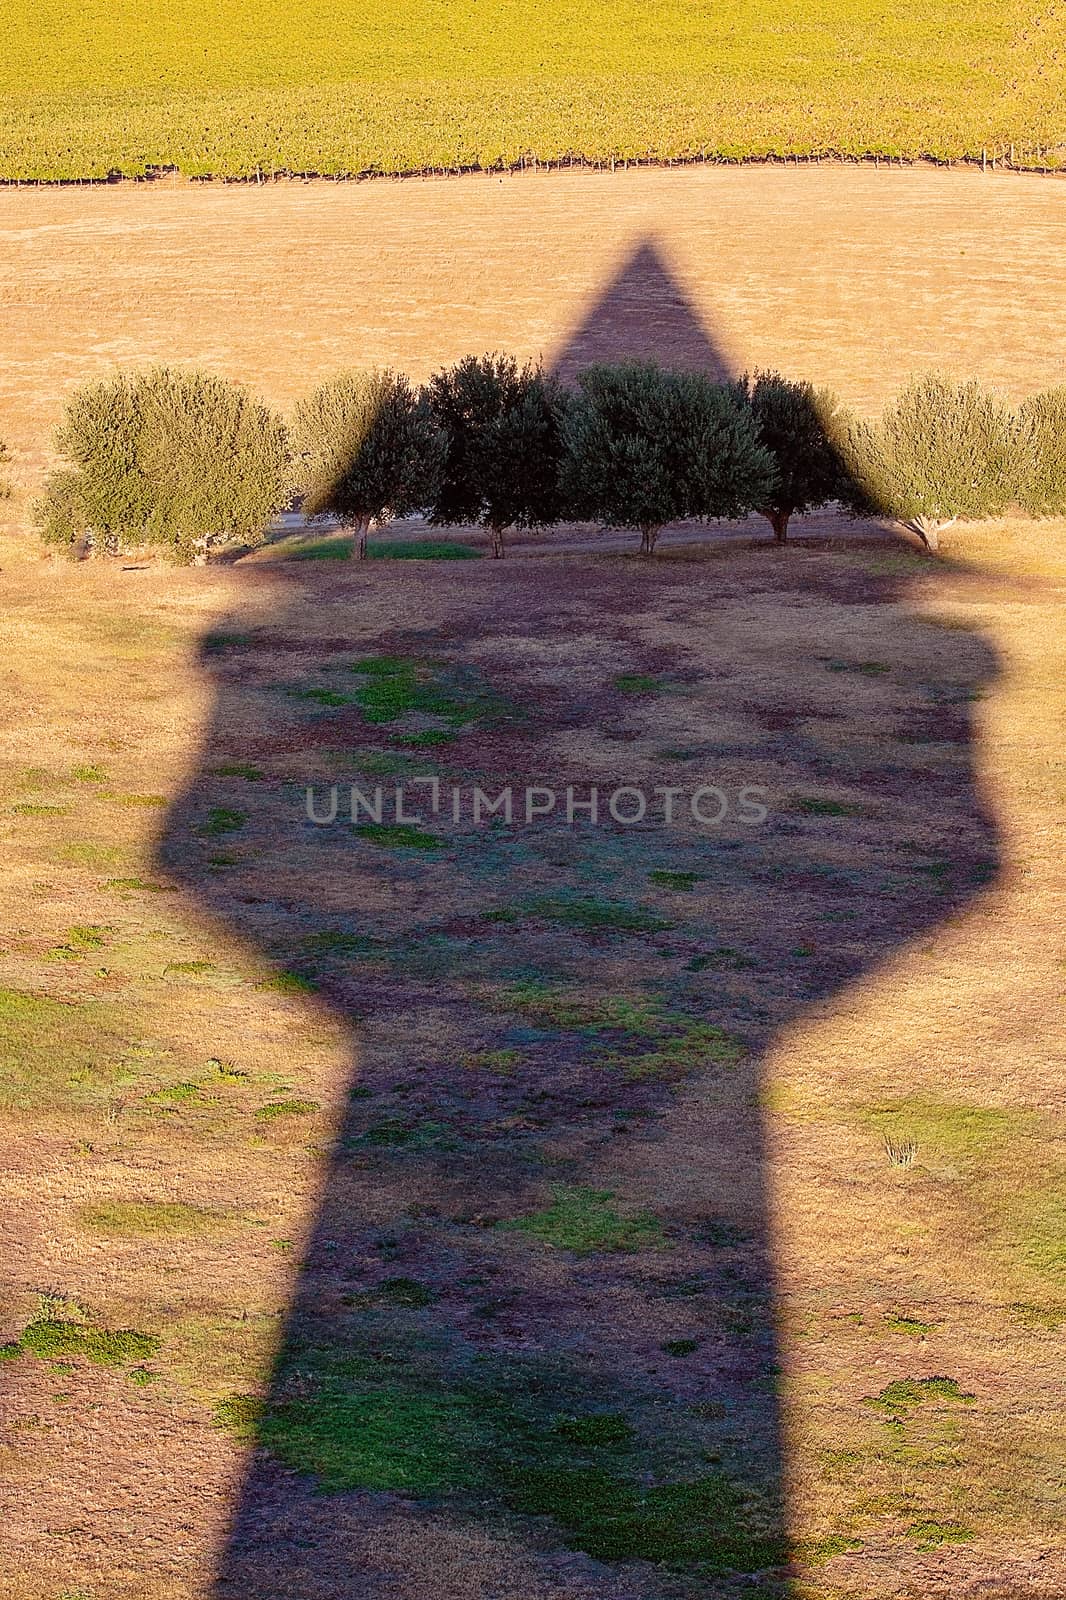 Architectural Shadow On A Grassy Field by 	JacksonStock